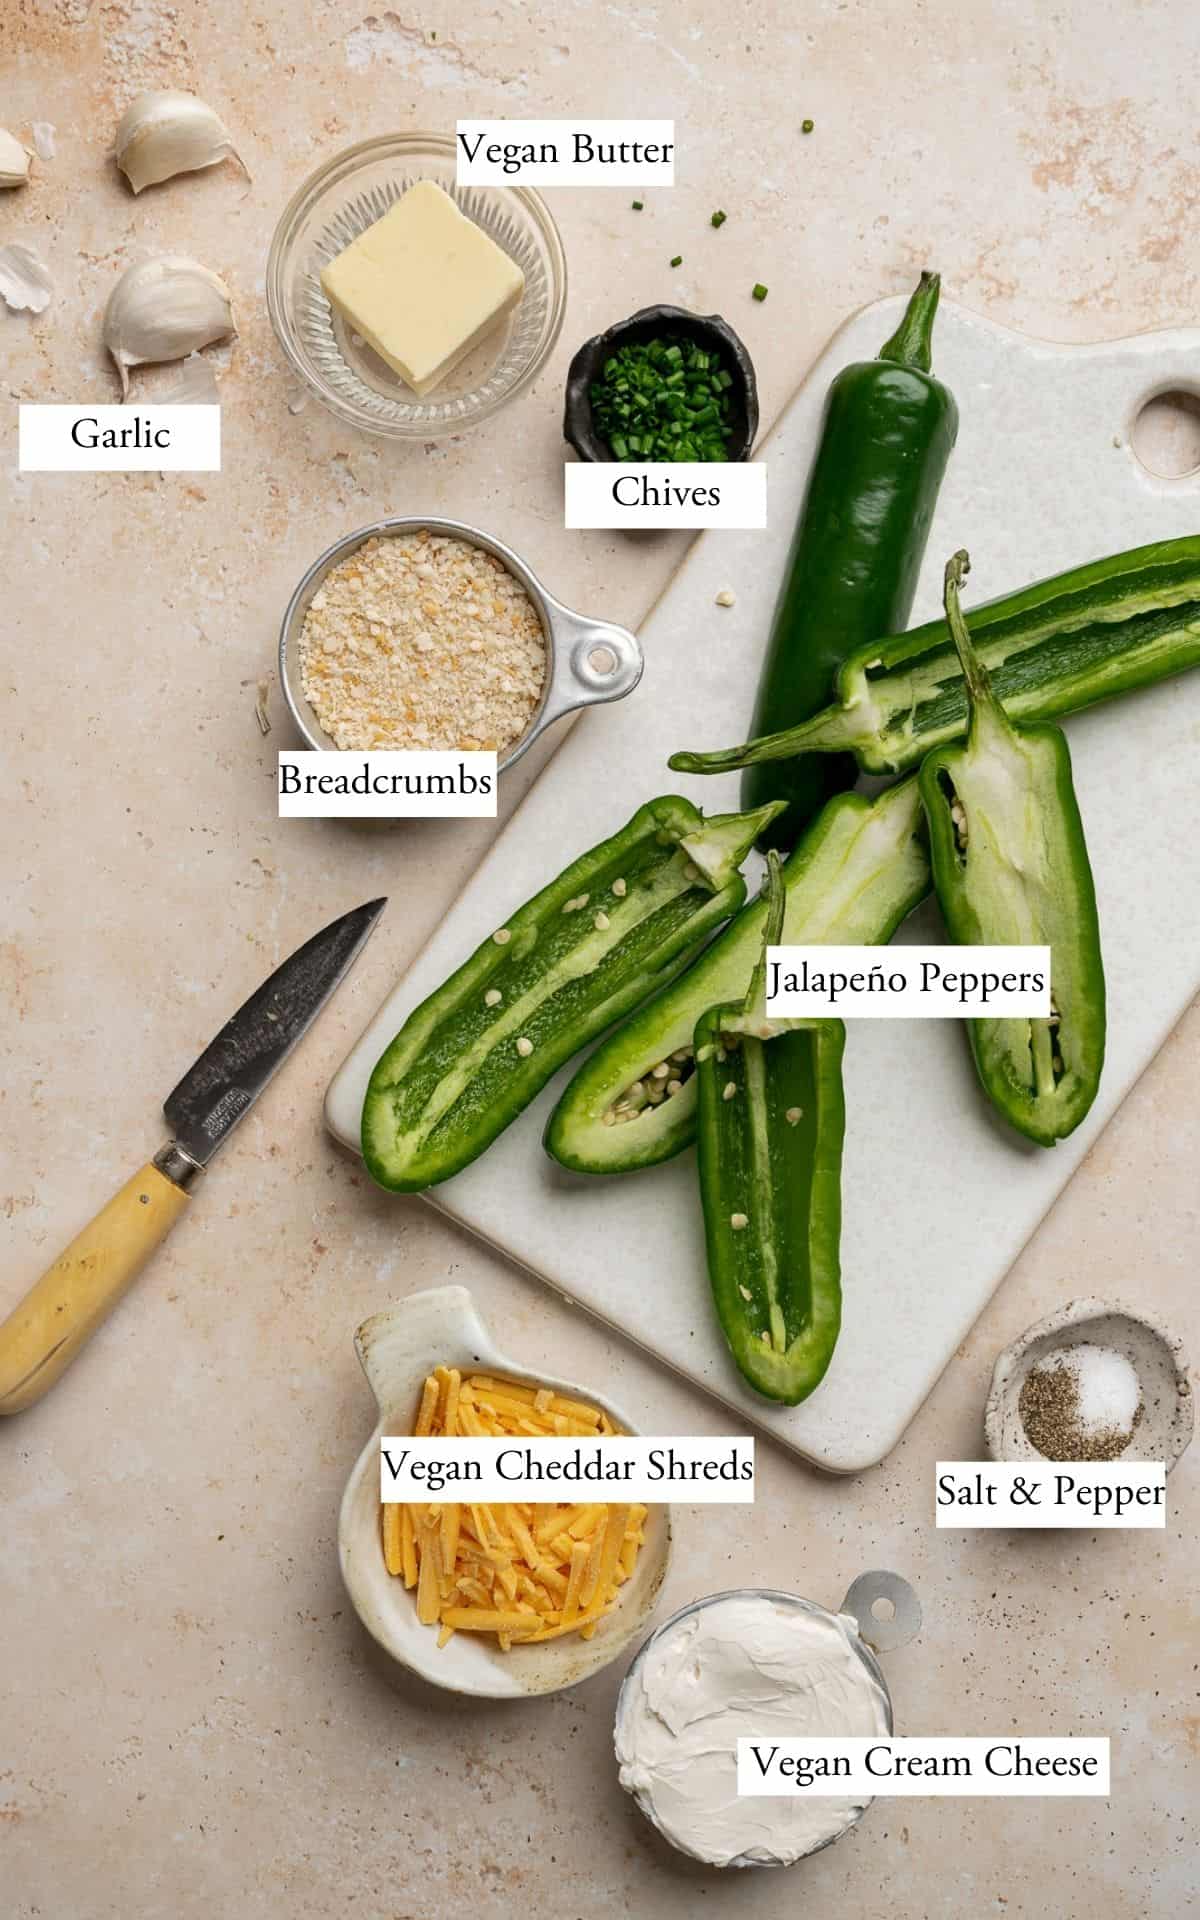 ingredients for jalapeño poppers: jalapenos, cream cheese, cheddar cheese, chives, bread crumbs, salt & pepper.